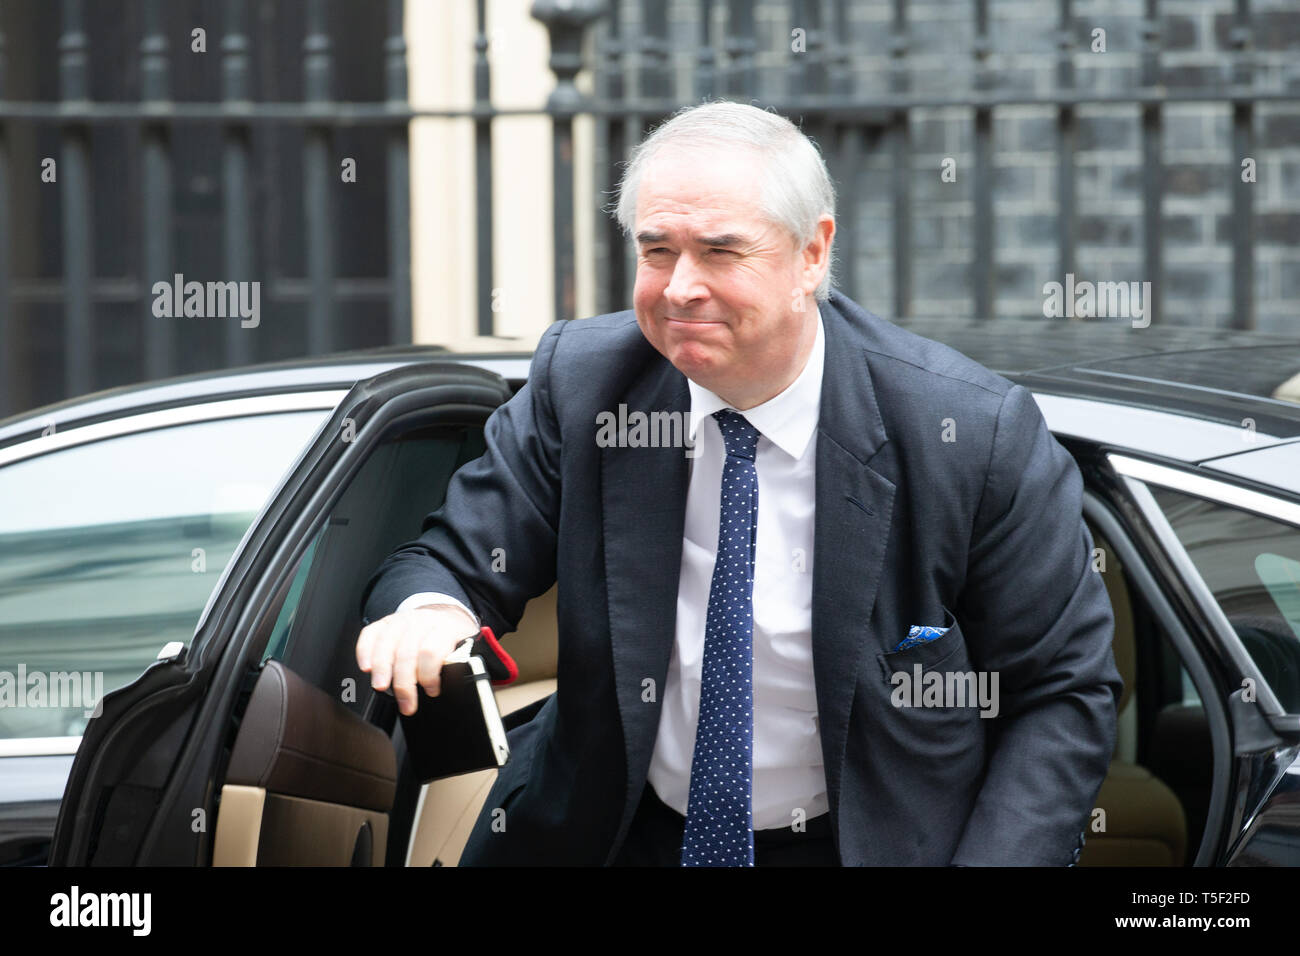 Geoffrey Cox, Attorney General, arrives at Number 10 Downing Street for crucial talks on Brexit. Stock Photo